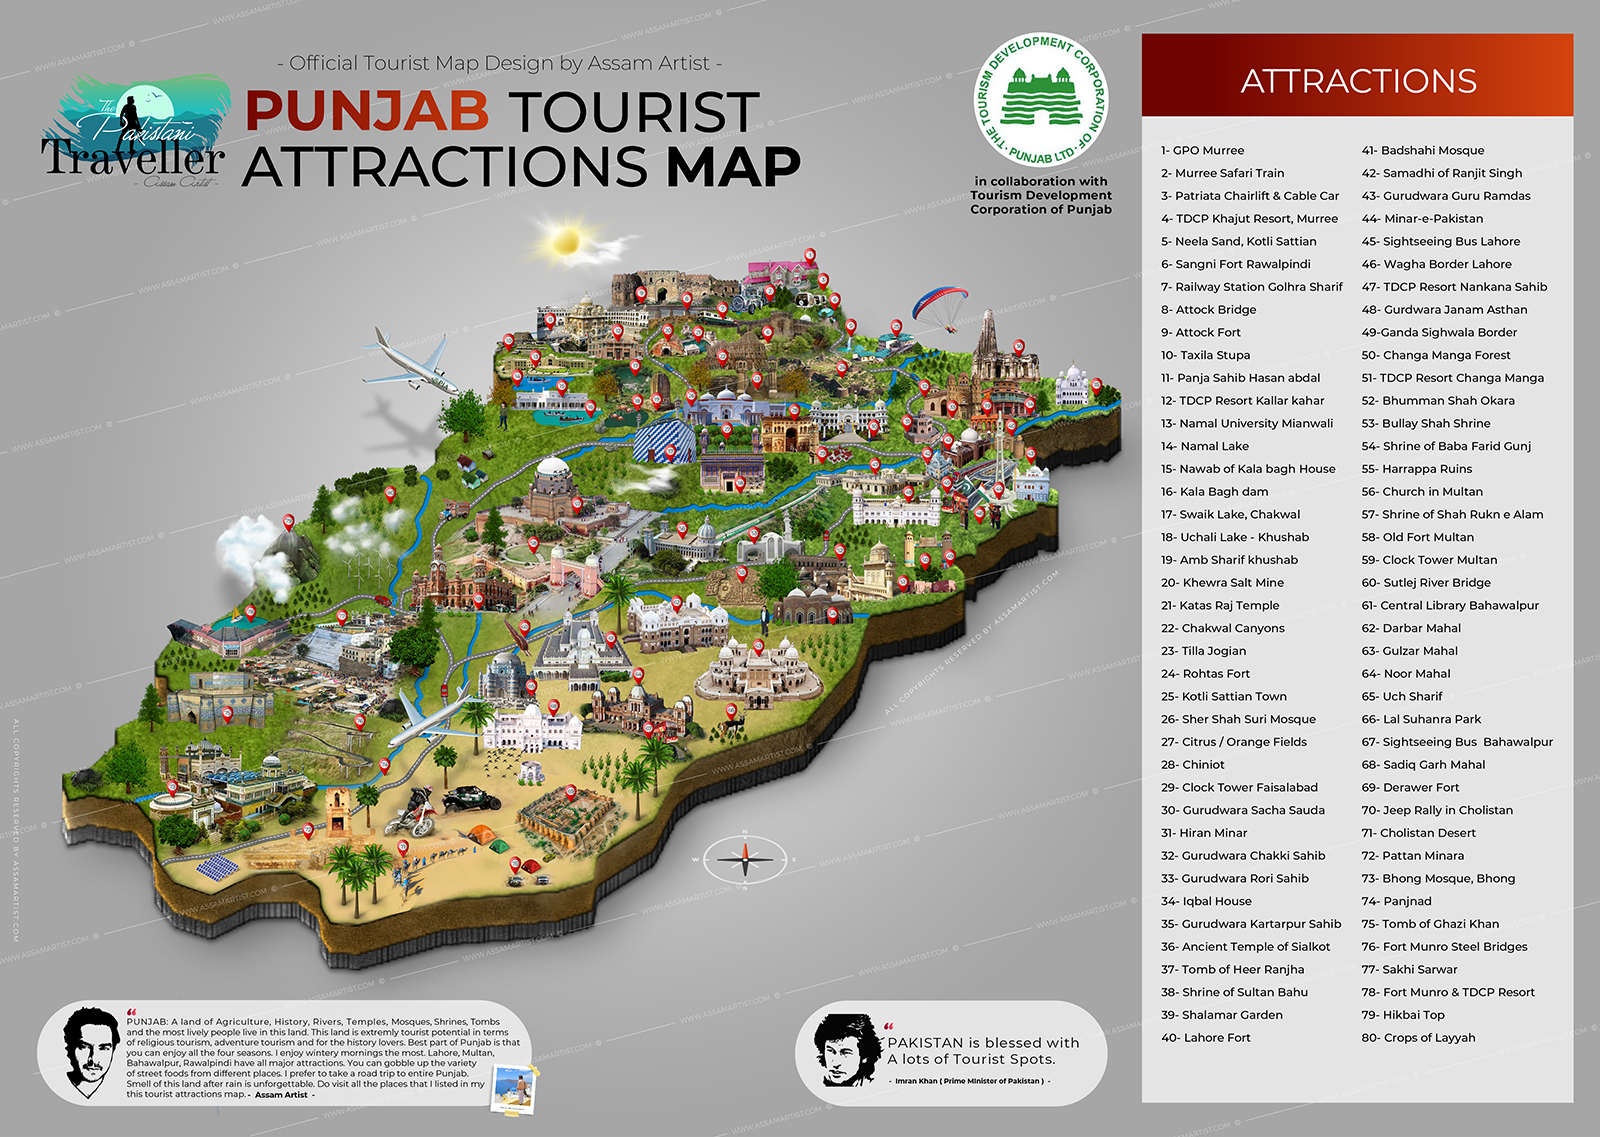 Punjab Tourist attractions map official 